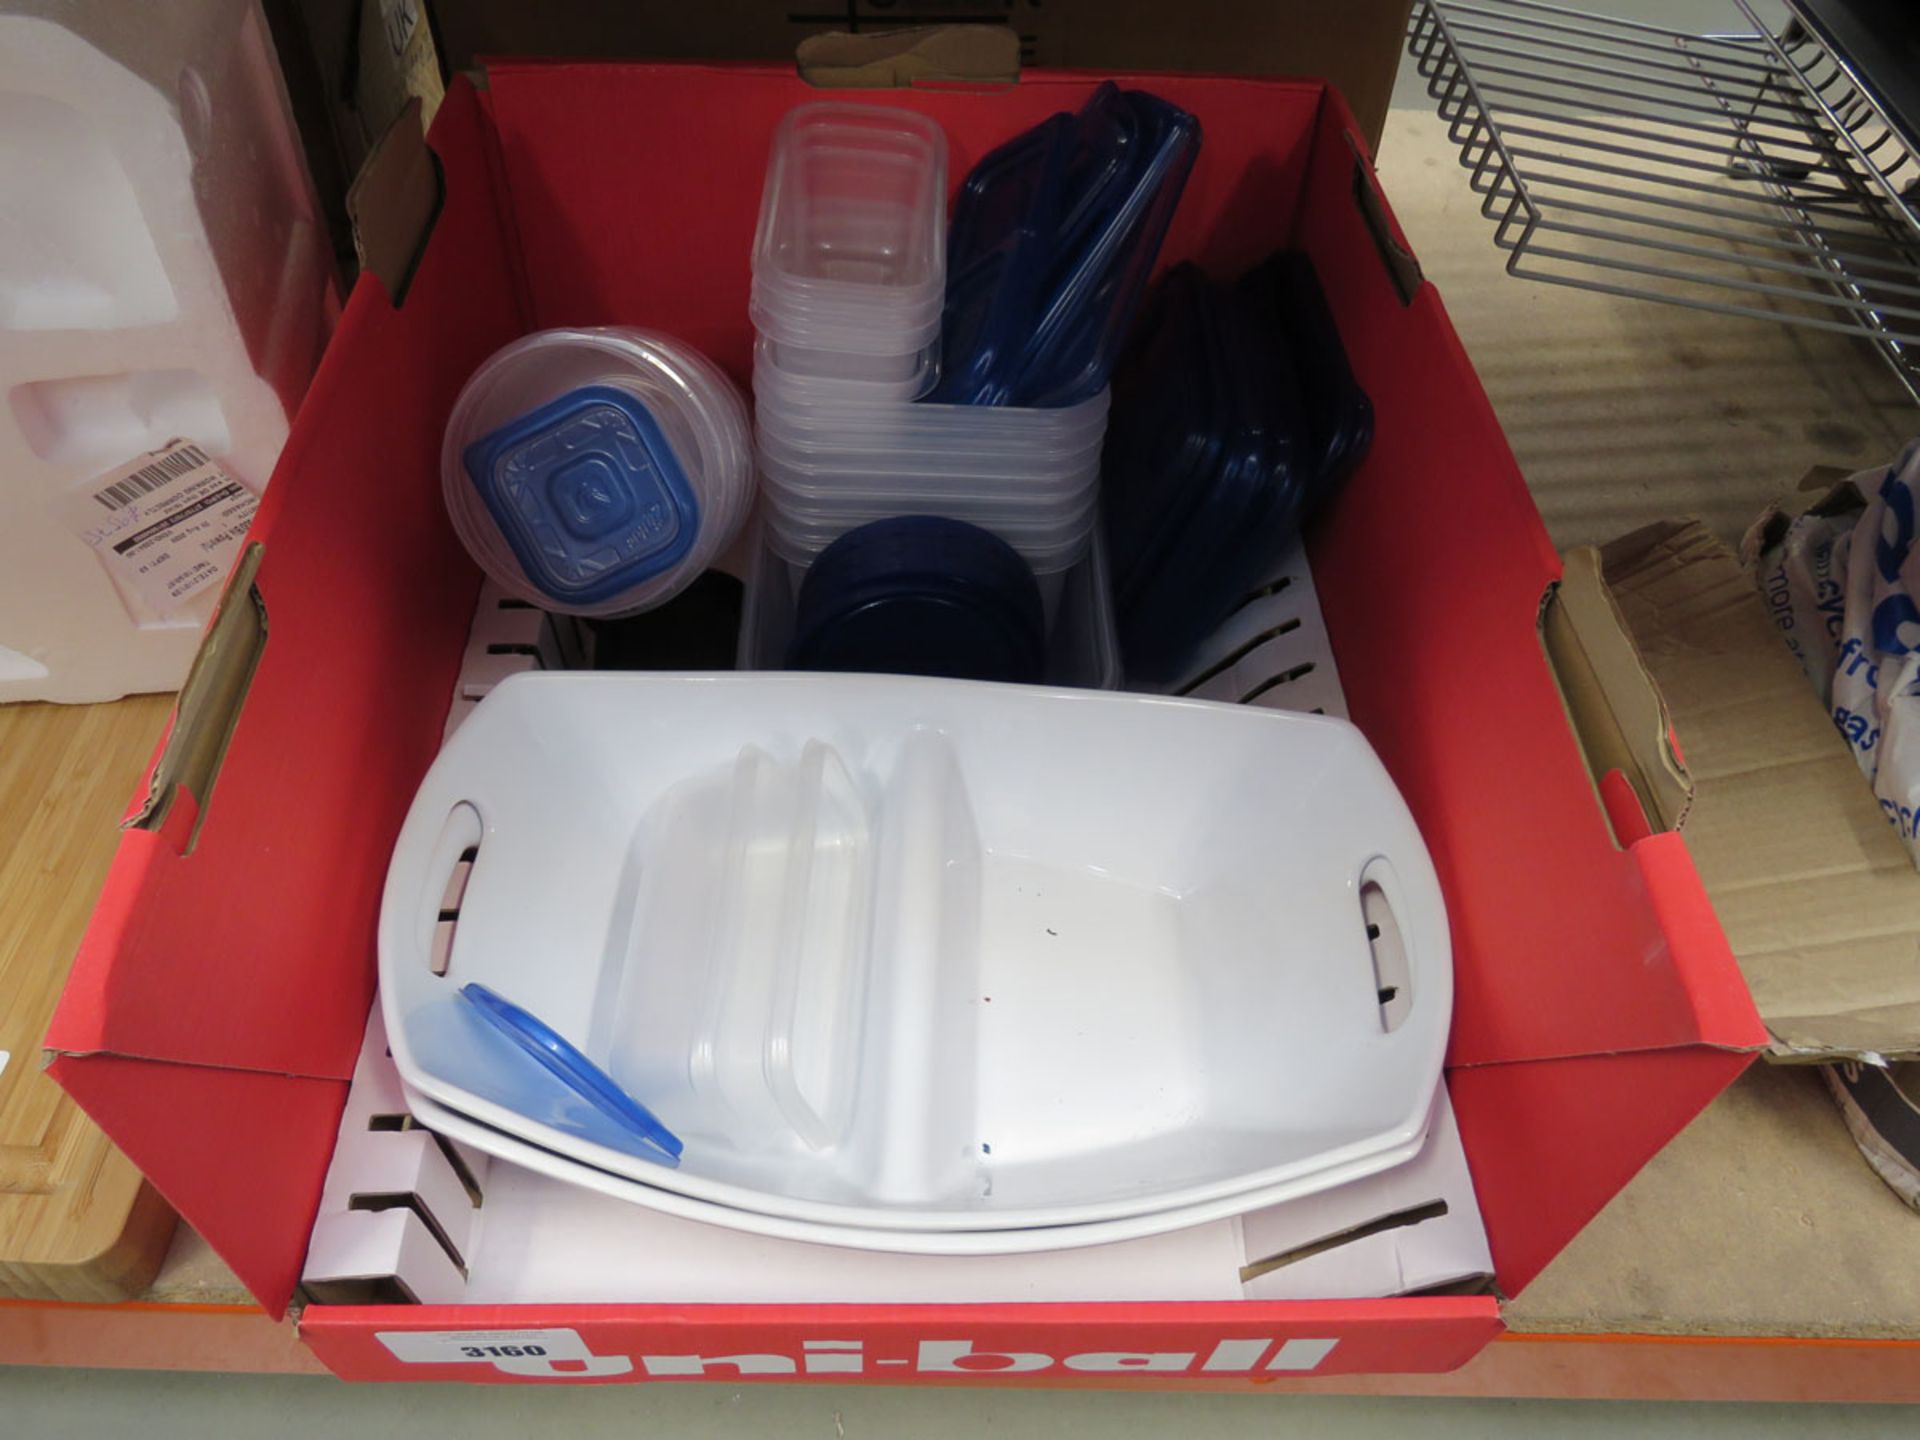 Tray of food containers and serving set